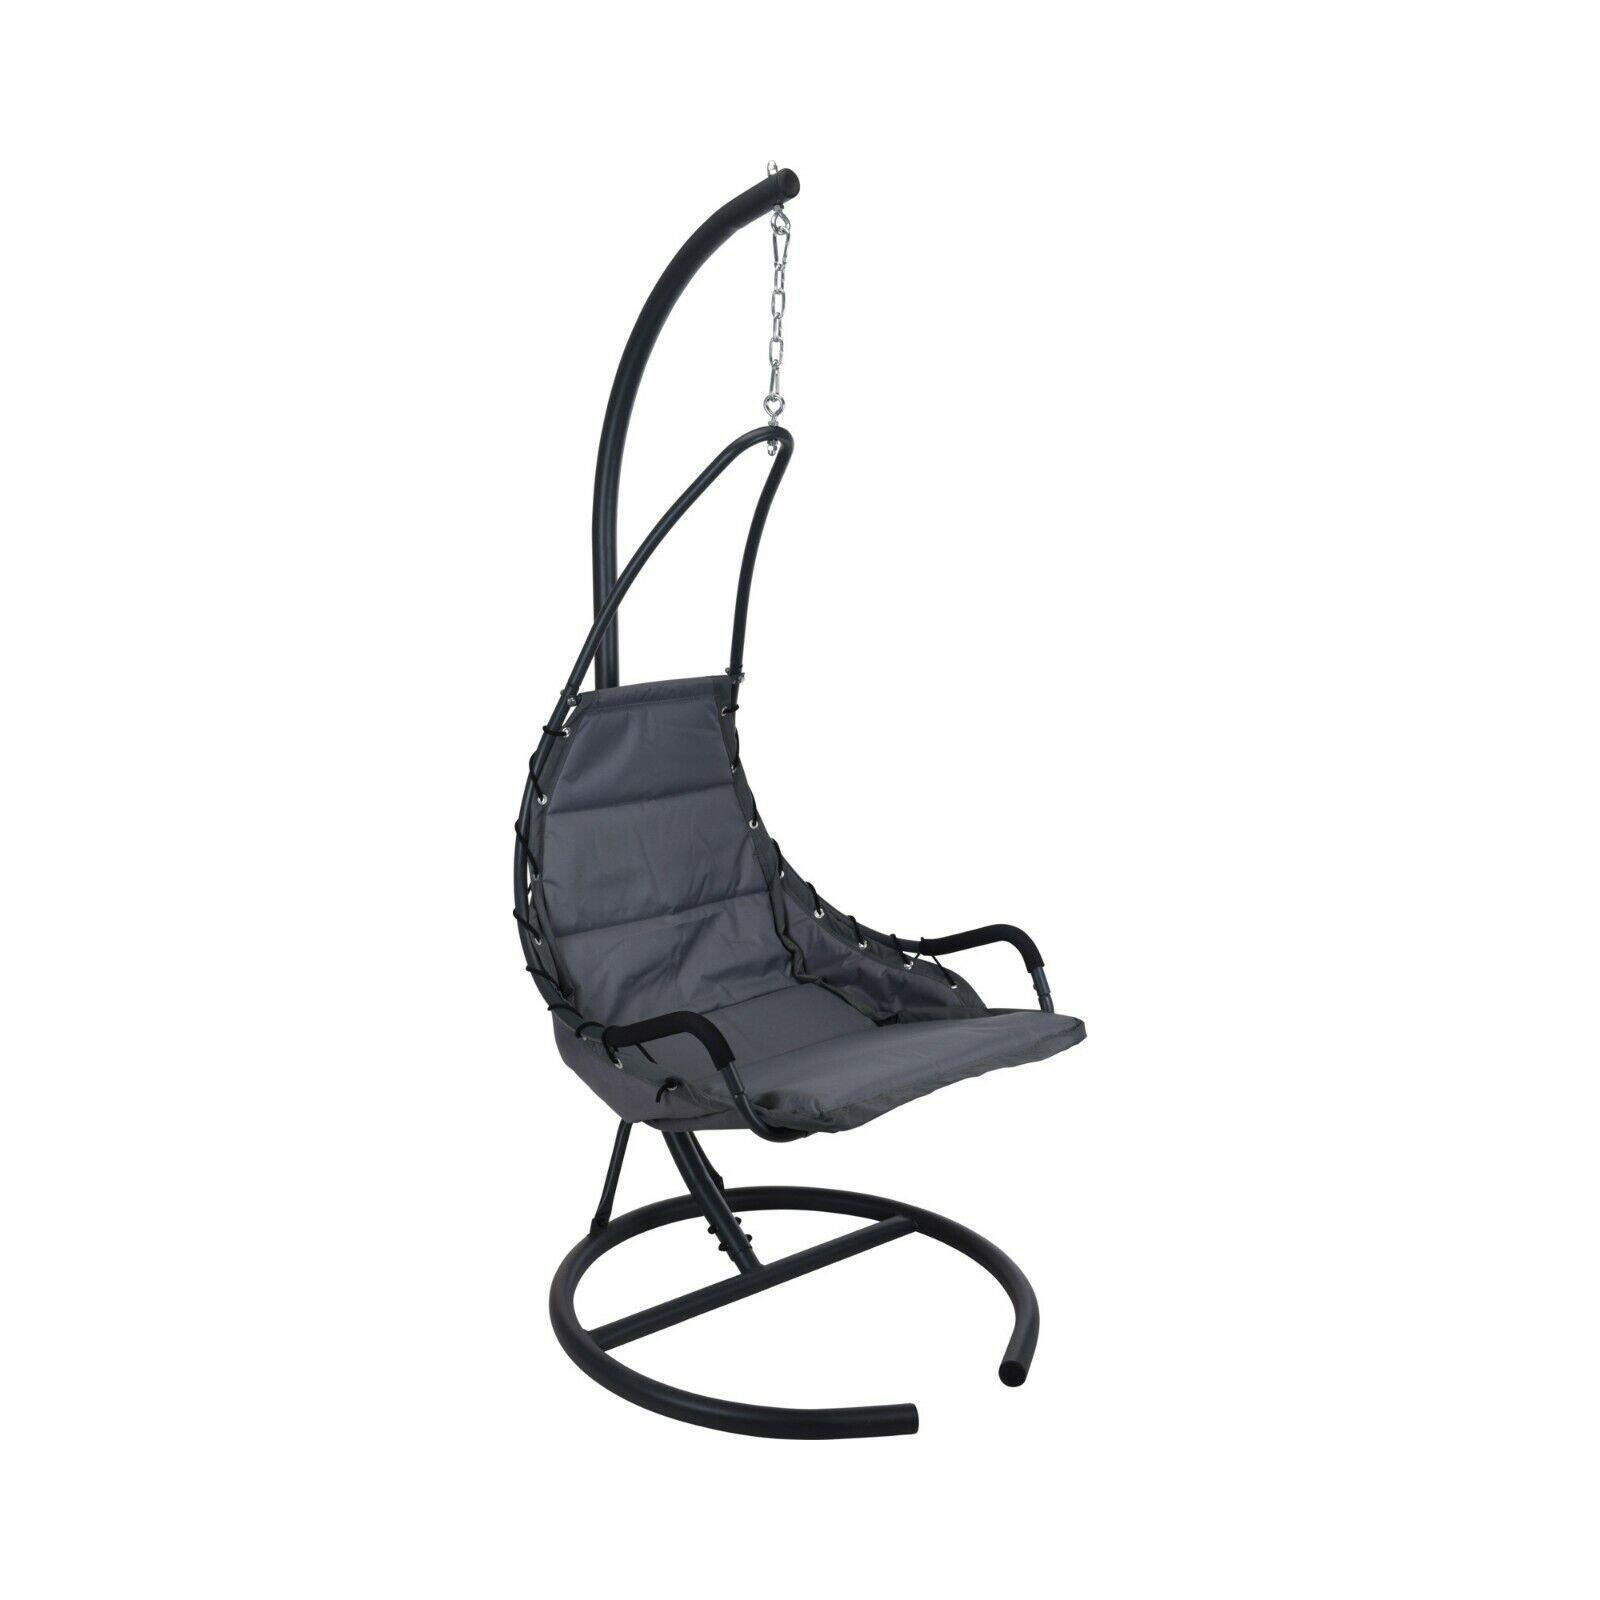 Hanging Chair Steel - image 1